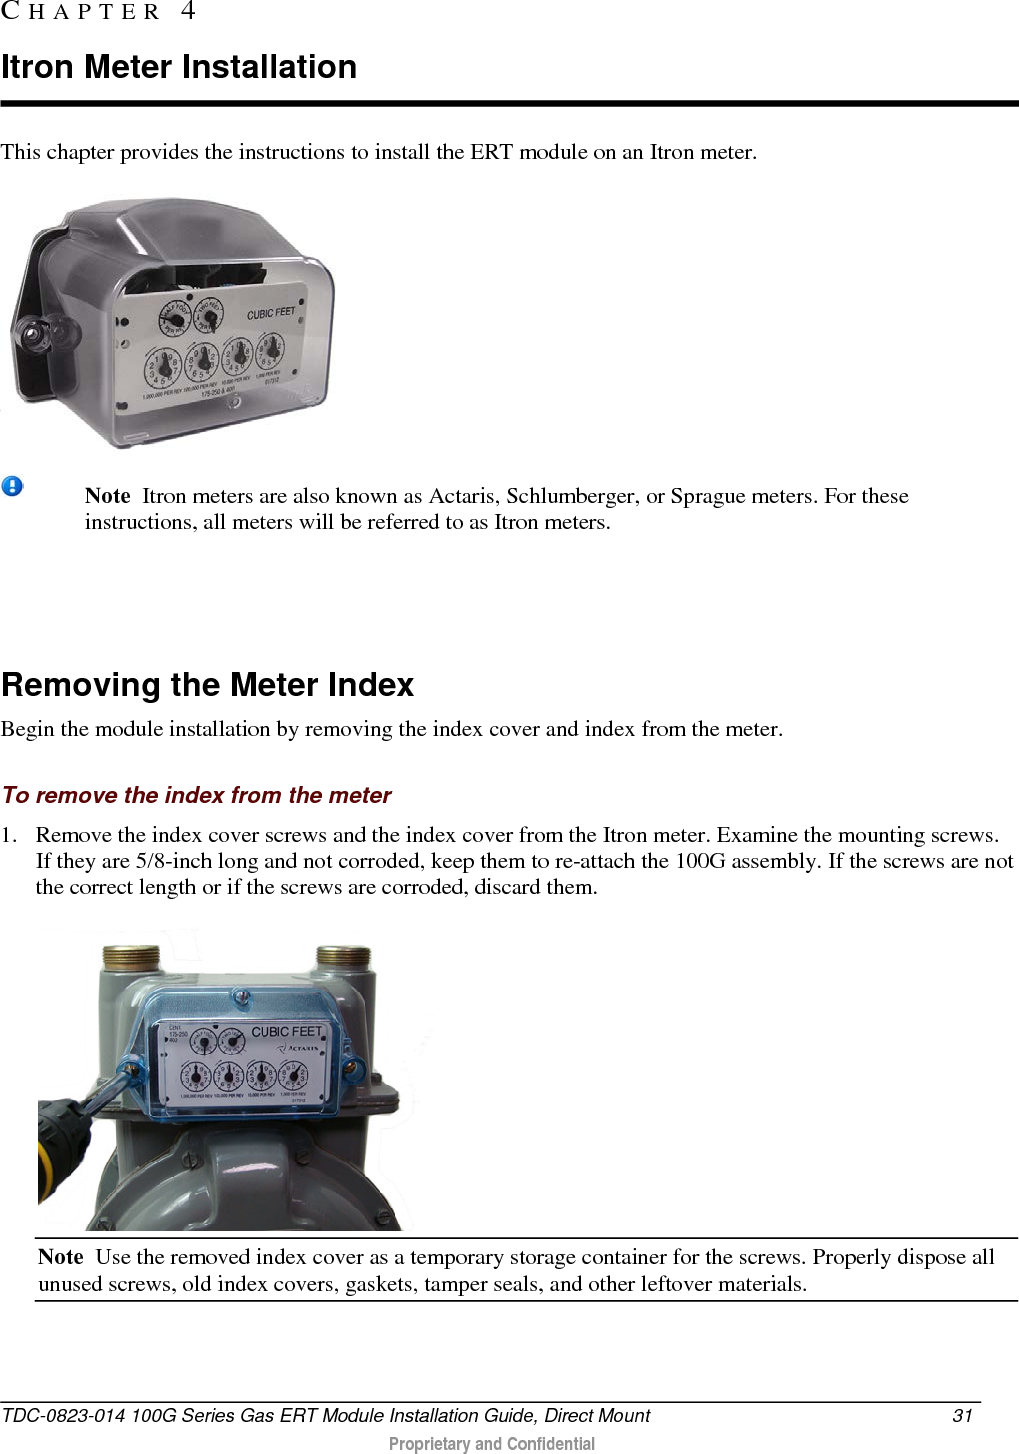  This chapter provides the instructions to install the ERT module on an Itron meter.   Note  Itron meters are also known as Actaris, Schlumberger, or Sprague meters. For these instructions, all meters will be referred to as Itron meters.    Removing the Meter Index Begin the module installation by removing the index cover and index from the meter.  To remove the index from the meter 1. Remove the index cover screws and the index cover from the Itron meter. Examine the mounting screws. If they are 5/8-inch long and not corroded, keep them to re-attach the 100G assembly. If the screws are not the correct length or if the screws are corroded, discard them.   Note  Use the removed index cover as a temporary storage container for the screws. Properly dispose all unused screws, old index covers, gaskets, tamper seals, and other leftover materials.  CHAPTER  4  Itron Meter Installation TDC-0823-014 100G Series Gas ERT Module Installation Guide, Direct Mount 31   Proprietary and Confidential  